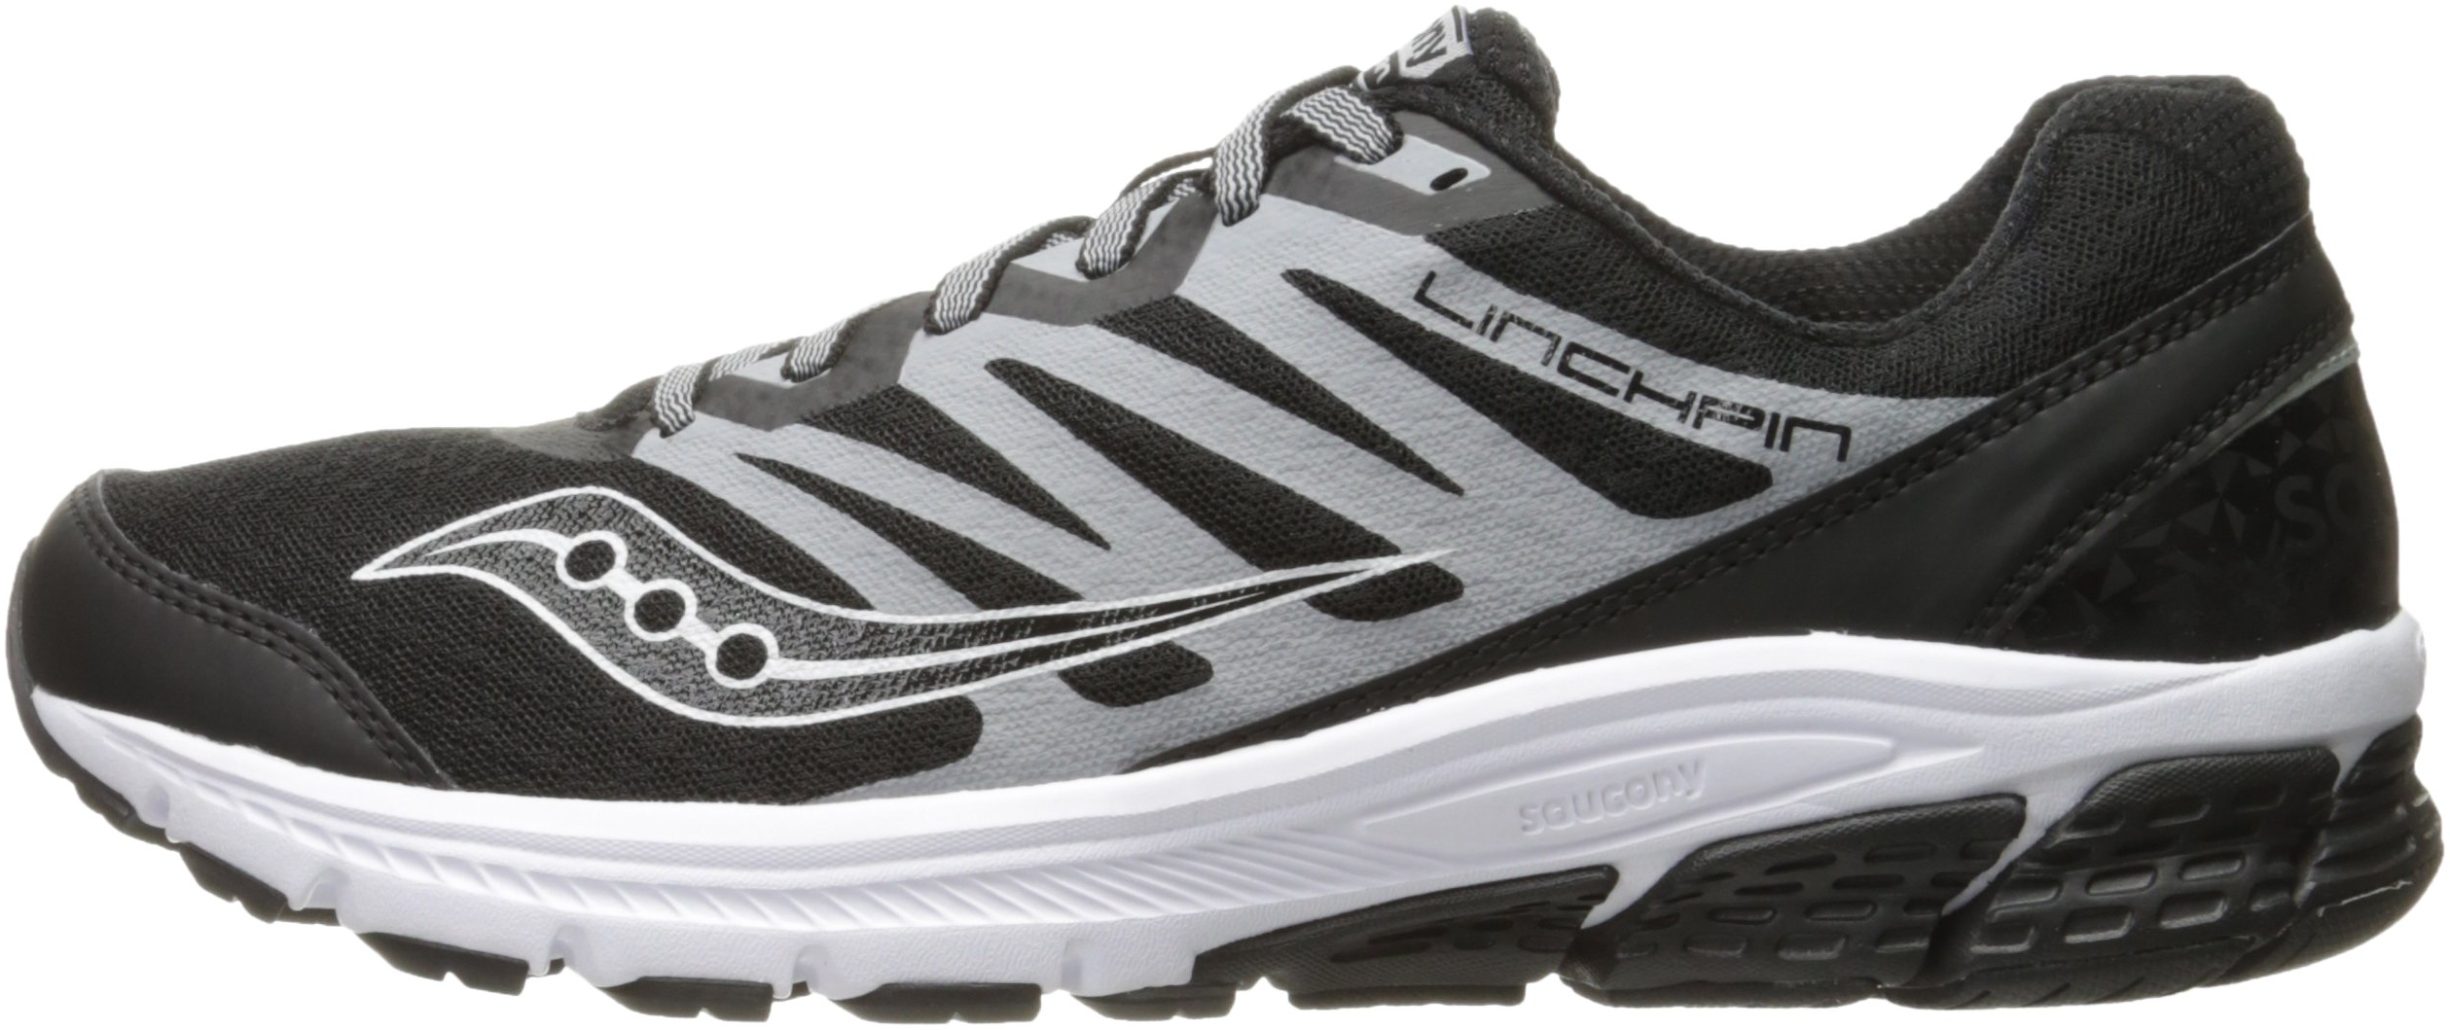 Only $53 + Review of Saucony Linchpin | RunRepeat